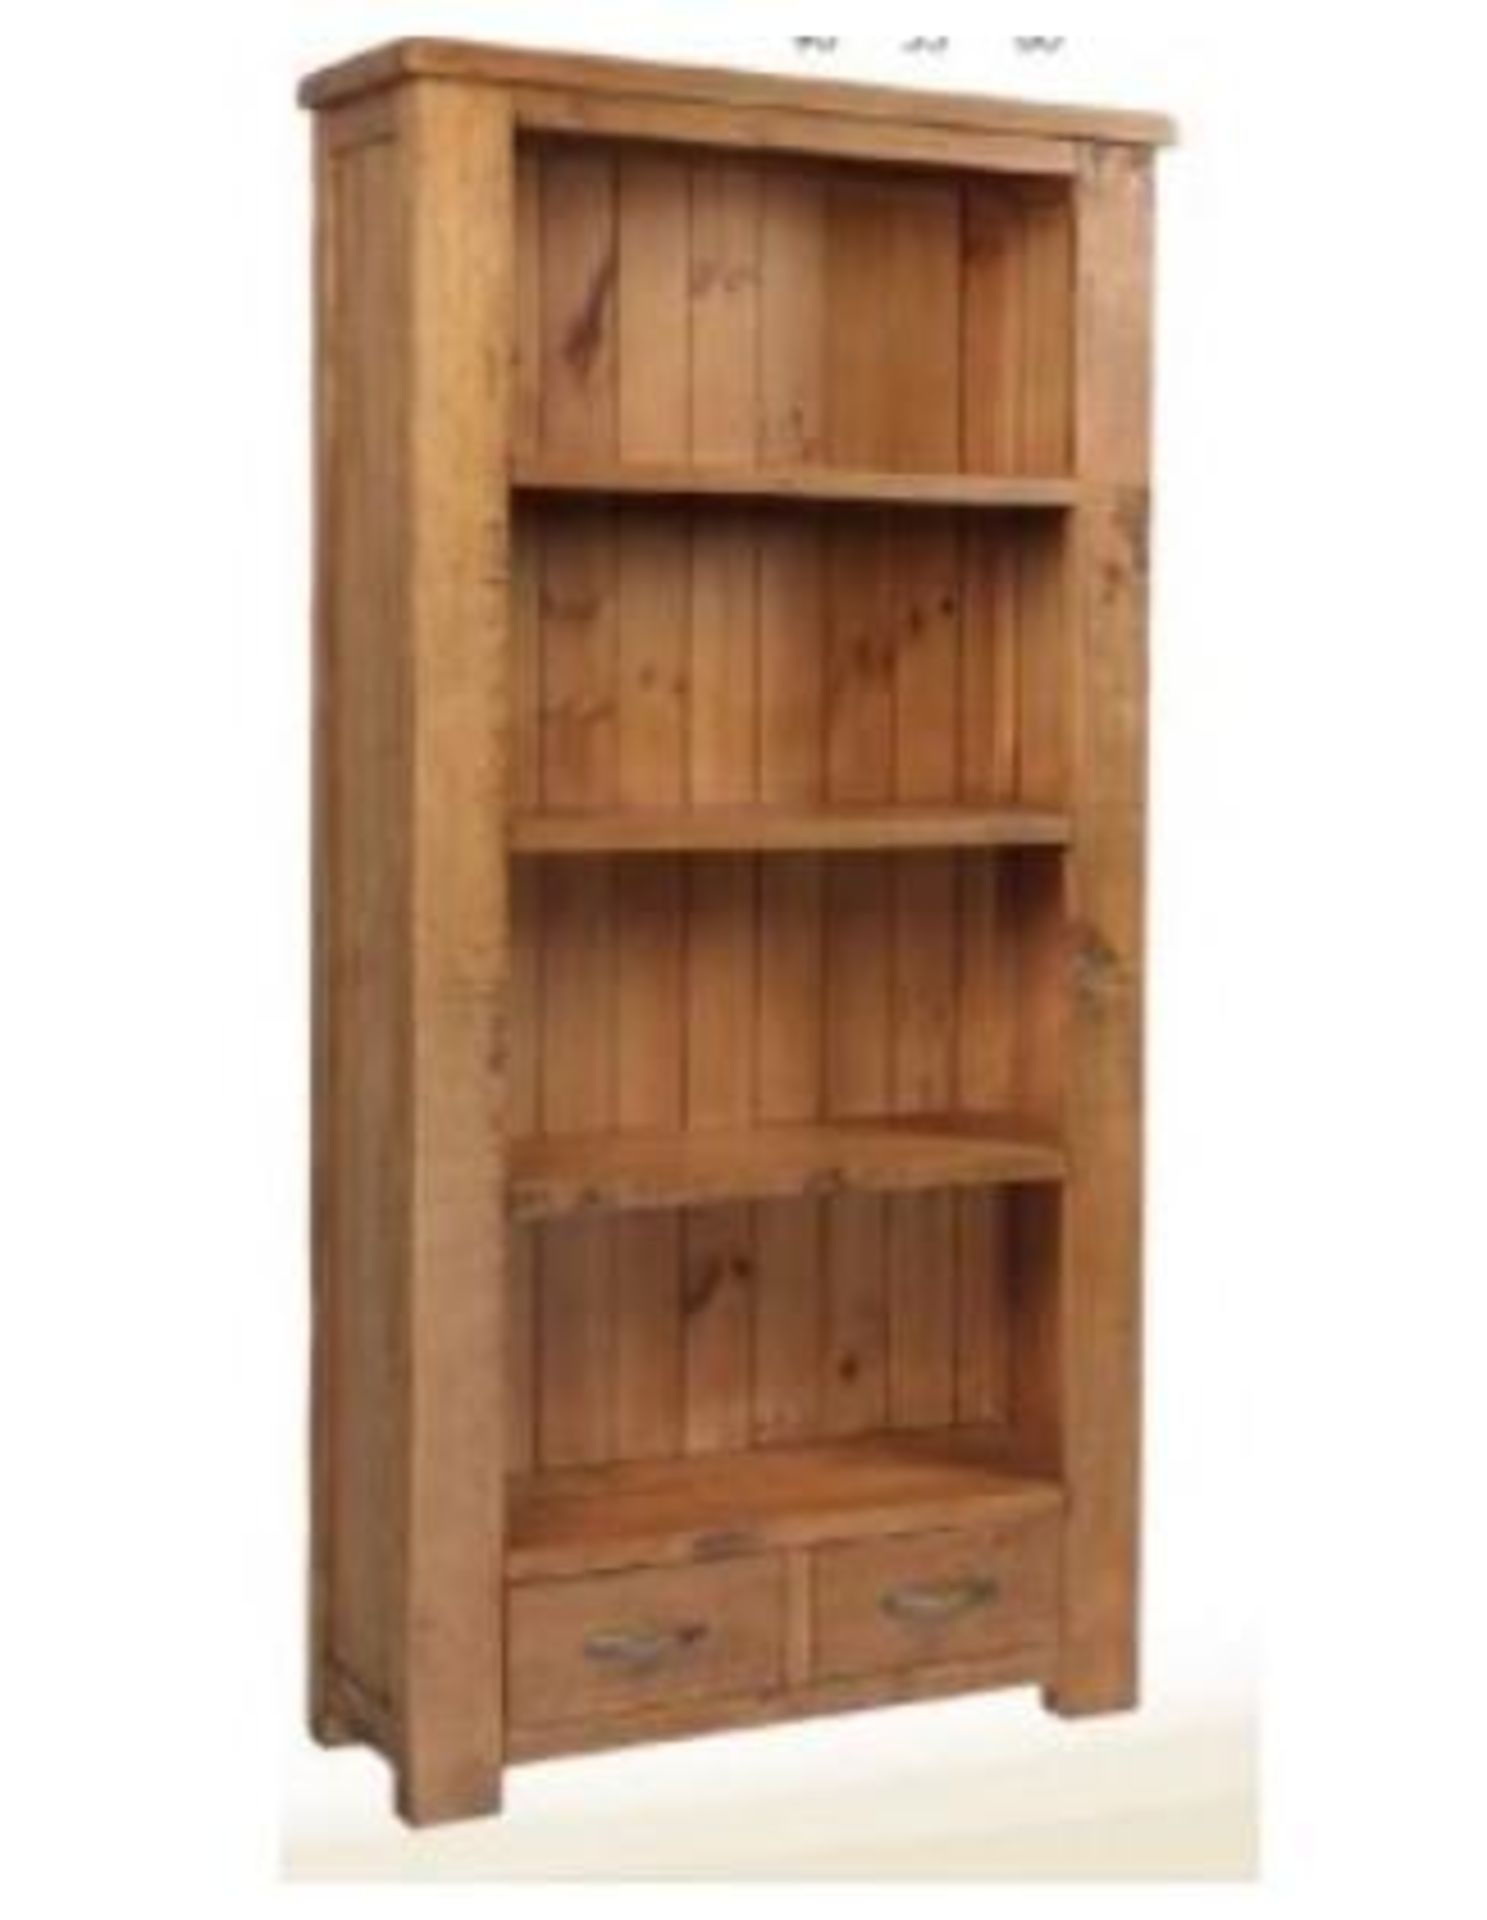 BRAND NEW & BOXED Montana large bookcase